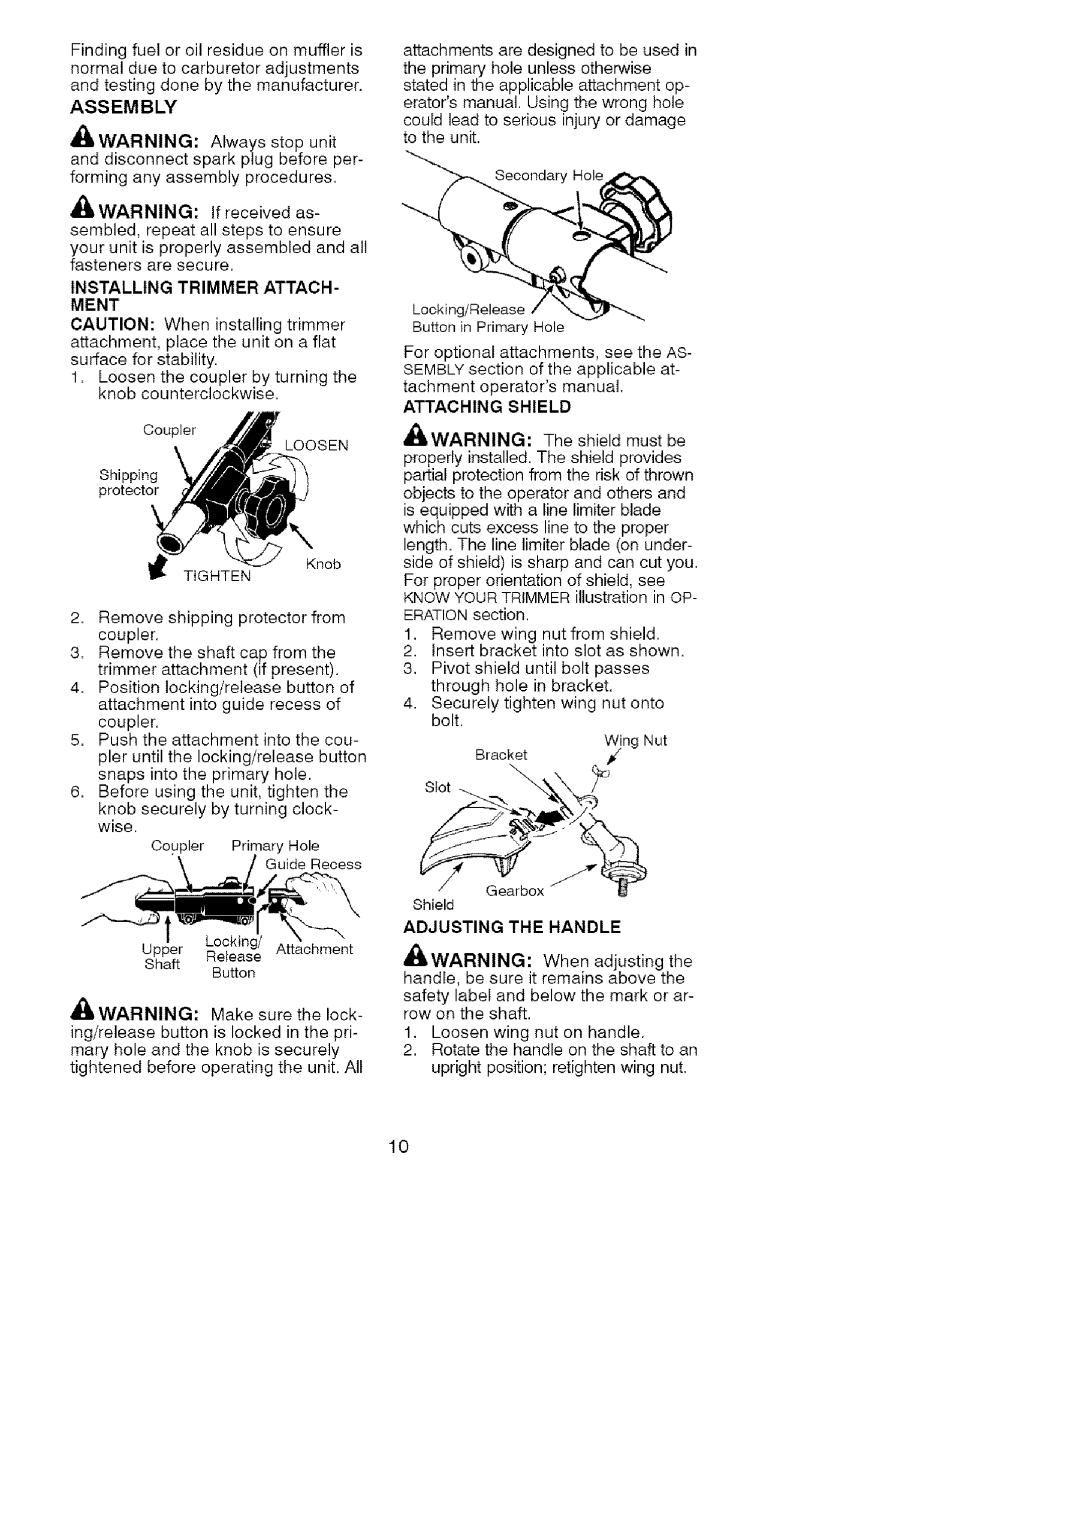 Craftsman 358.791051 manual andtestingdonebythemanufacturerstated, Assembly, Trimmer, Ment, Attaching Shield 